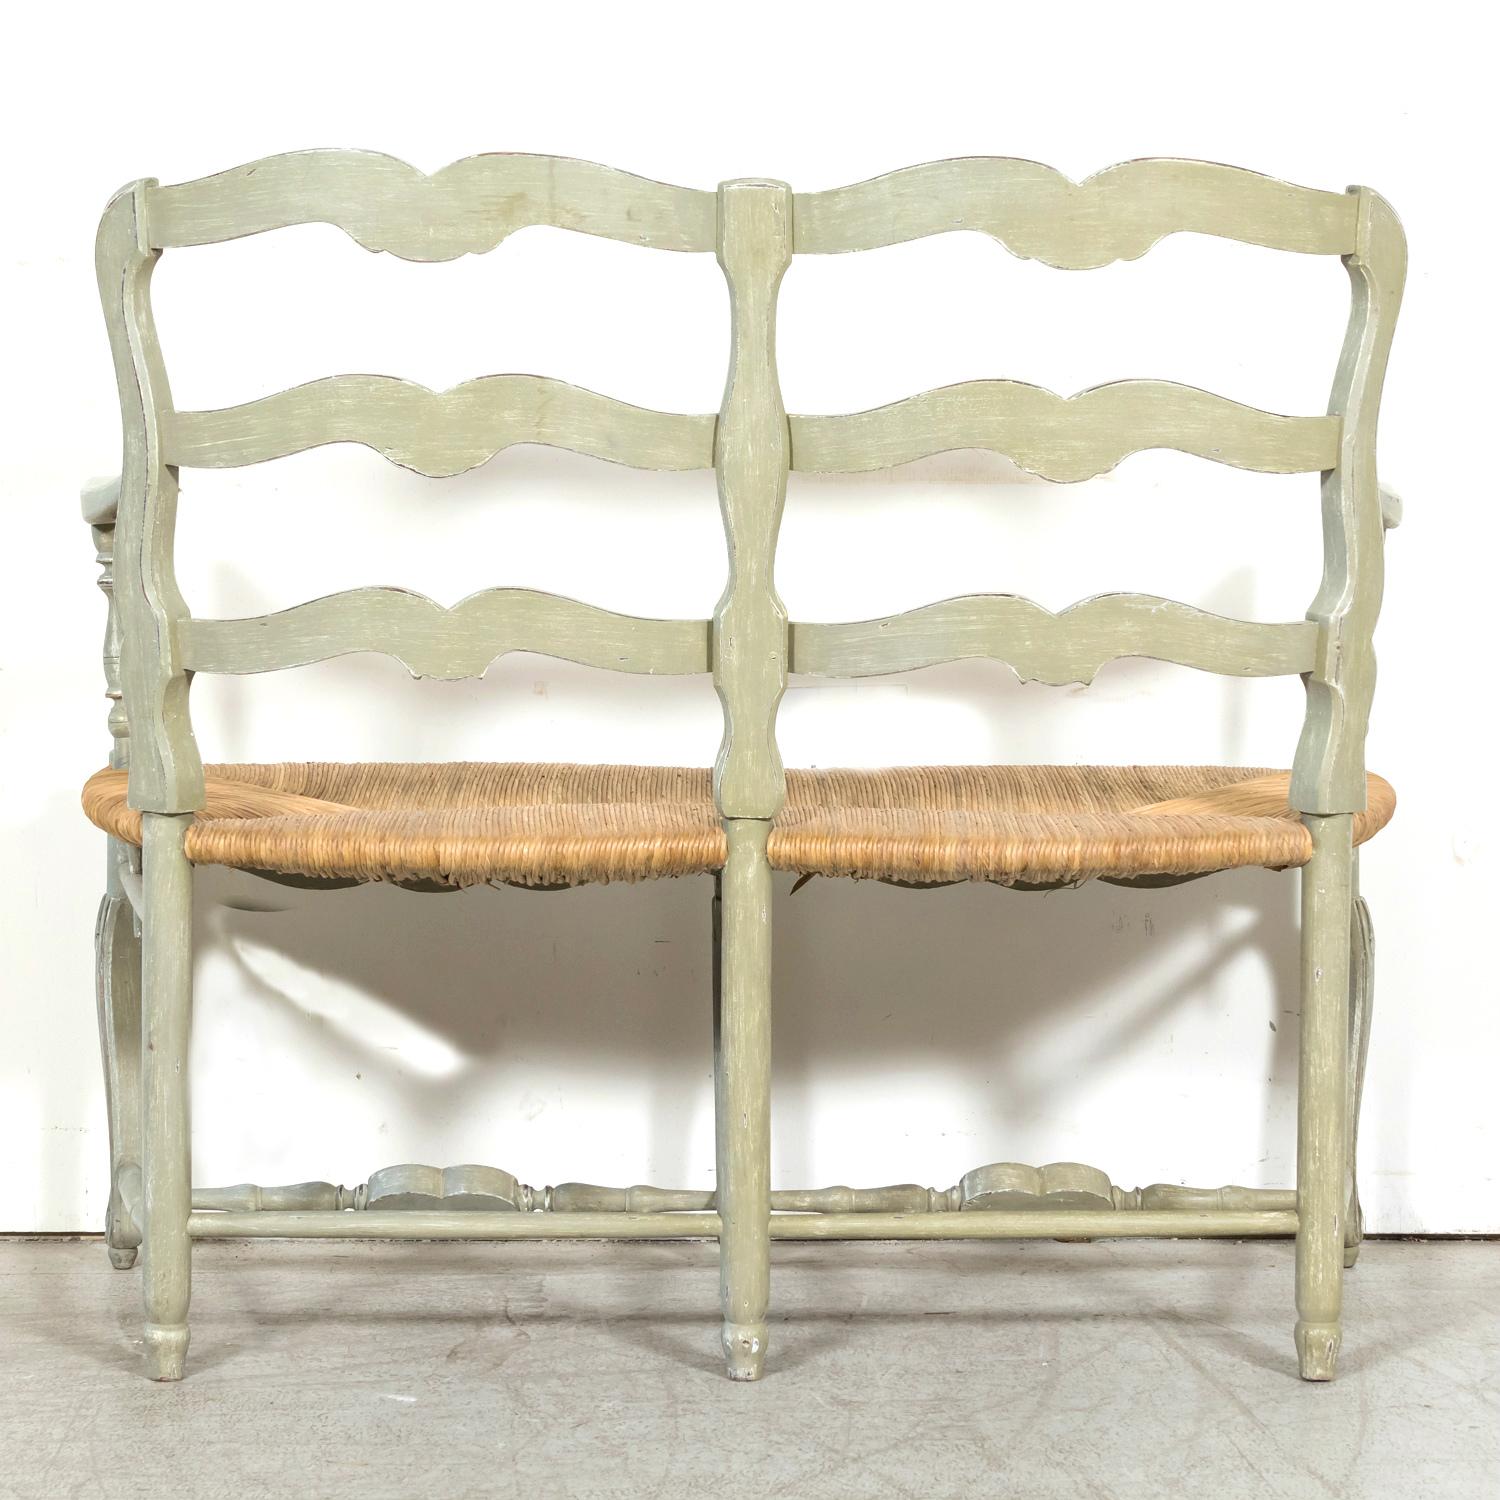 Antique French Provençal Louis XV Style Painted Settee or Radassier W/ Rush Seat For Sale 13